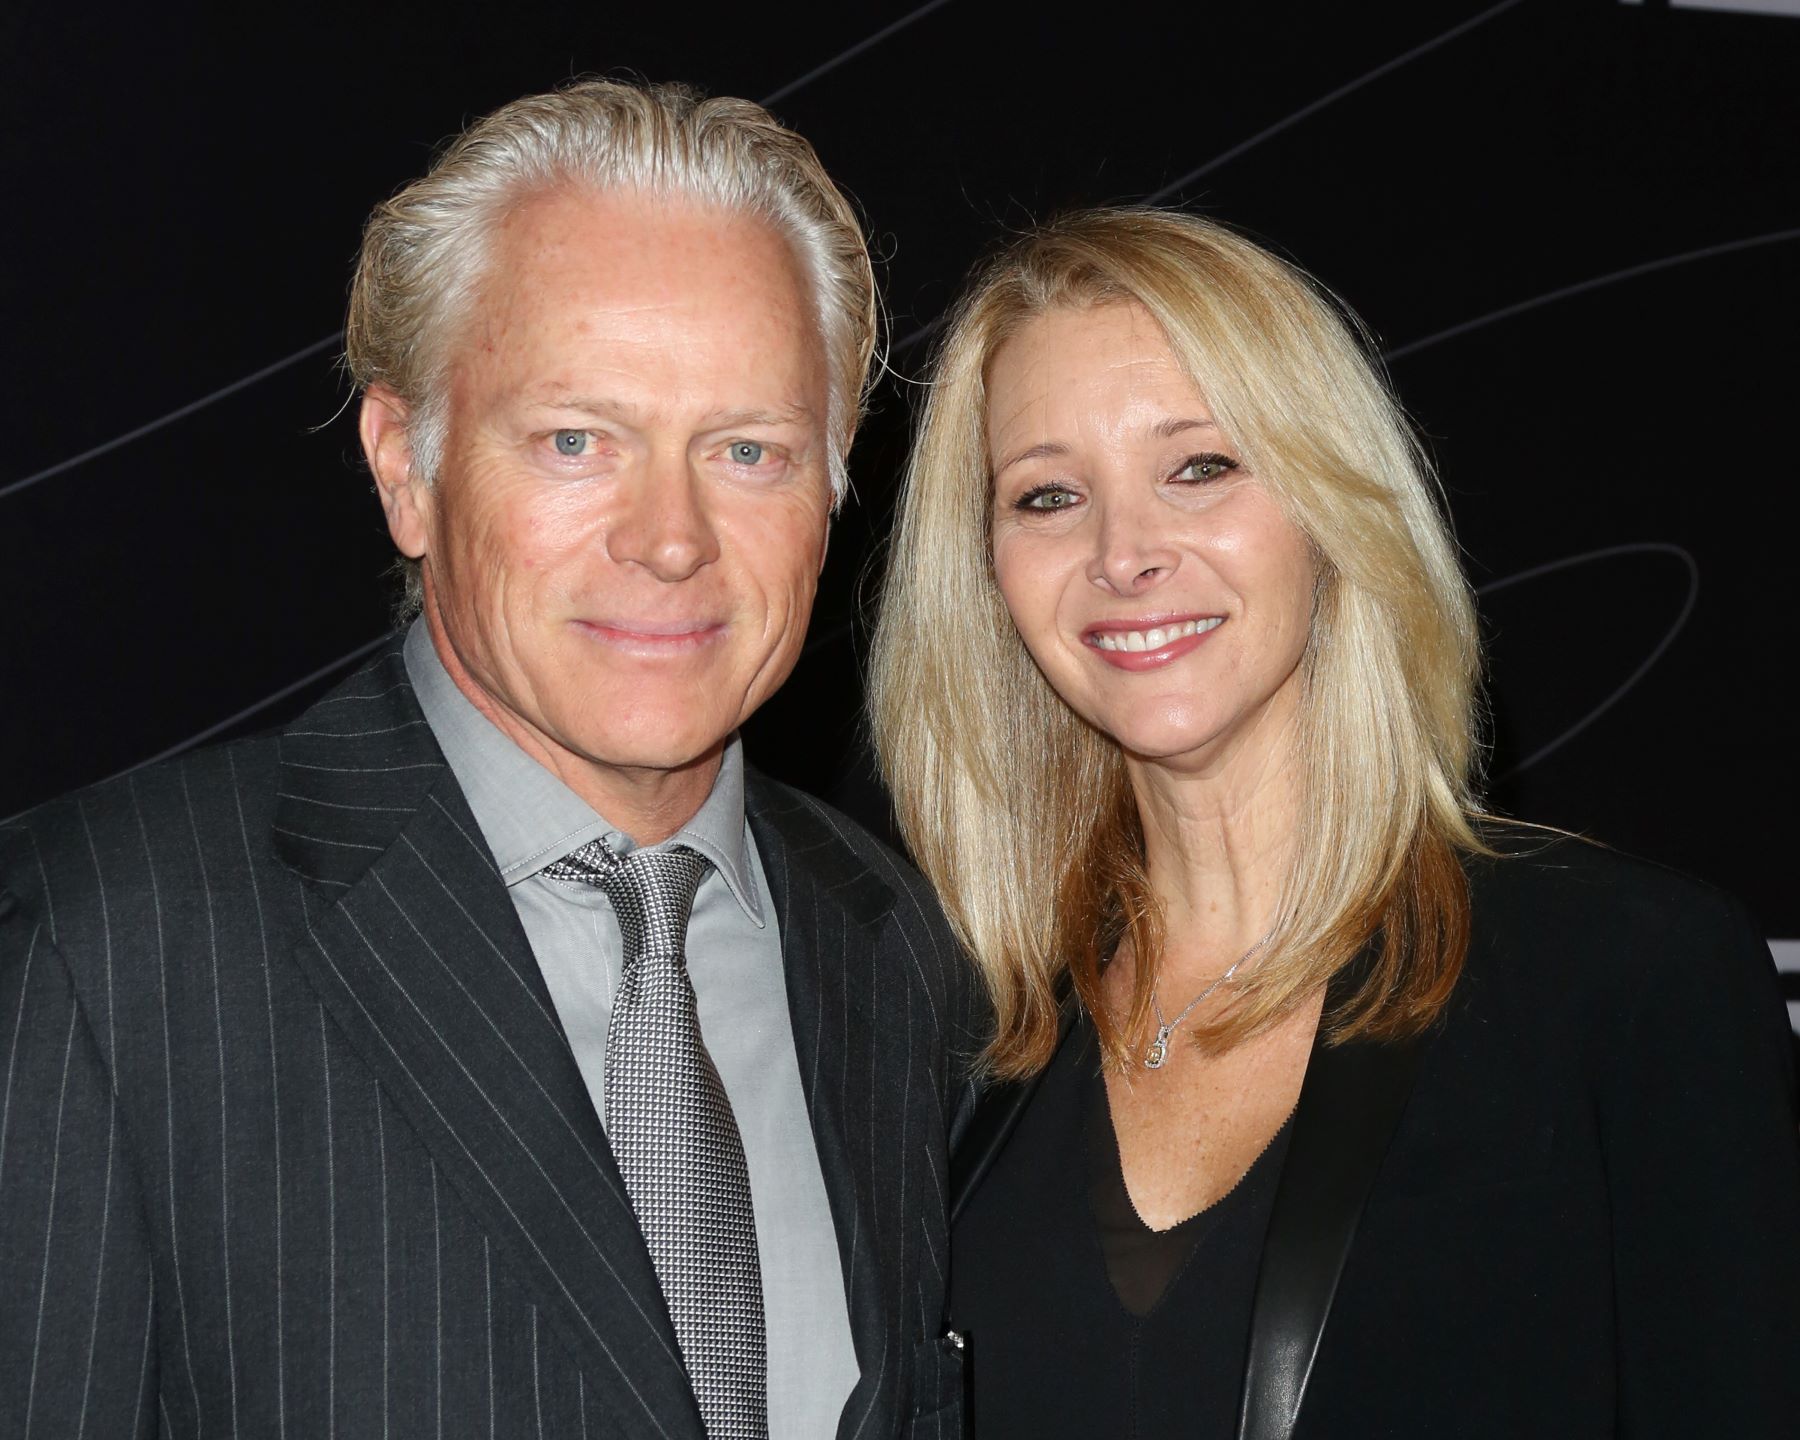 Husband and wife Michel Stern and Lisa Kudrow at the Peterson Automotive Museum grand re-opening gala